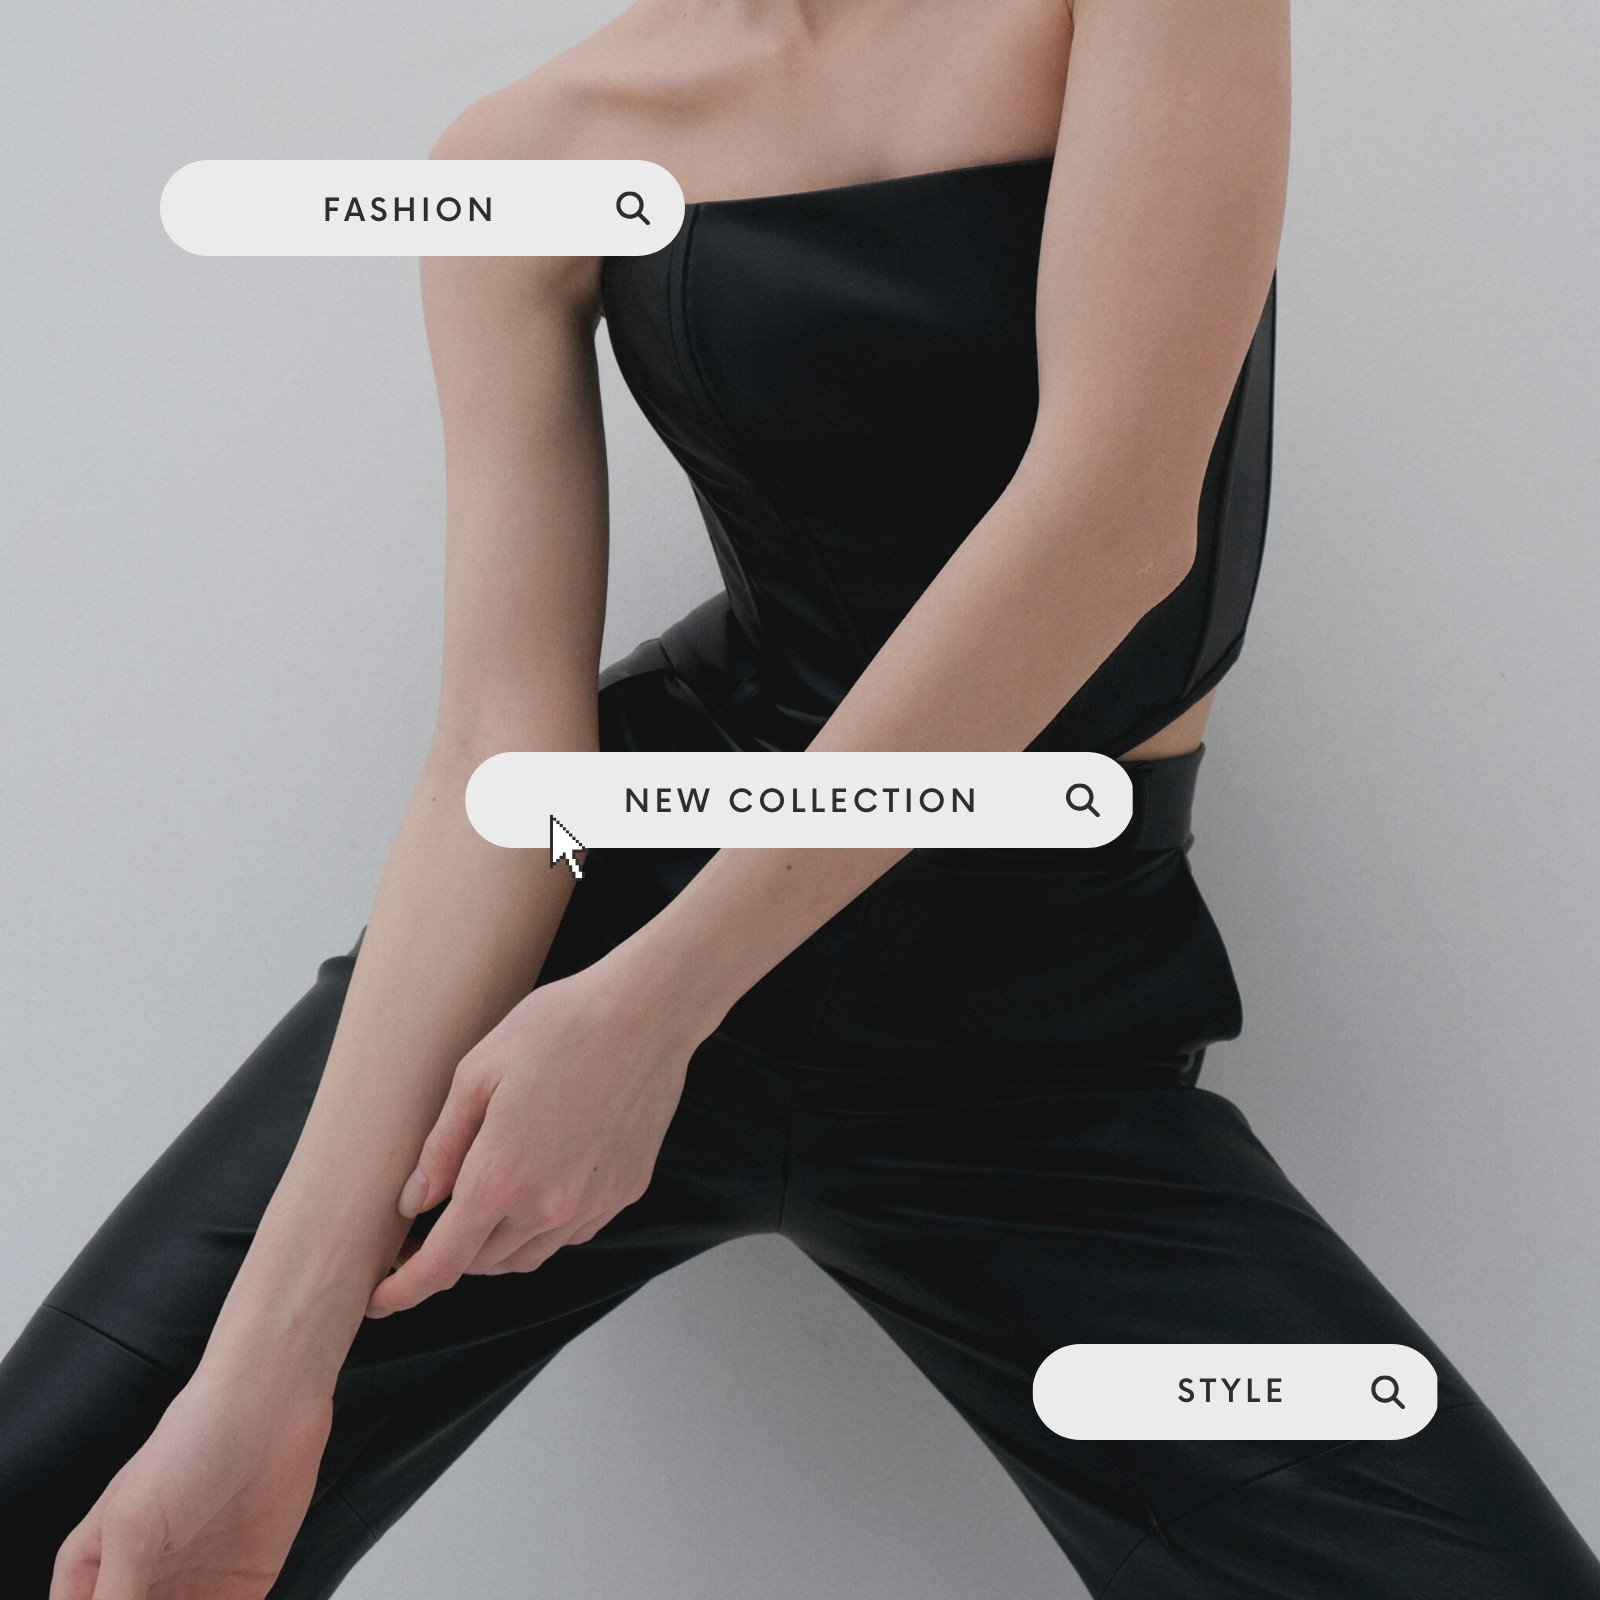 Page 3 - Free and customizable clothing templates